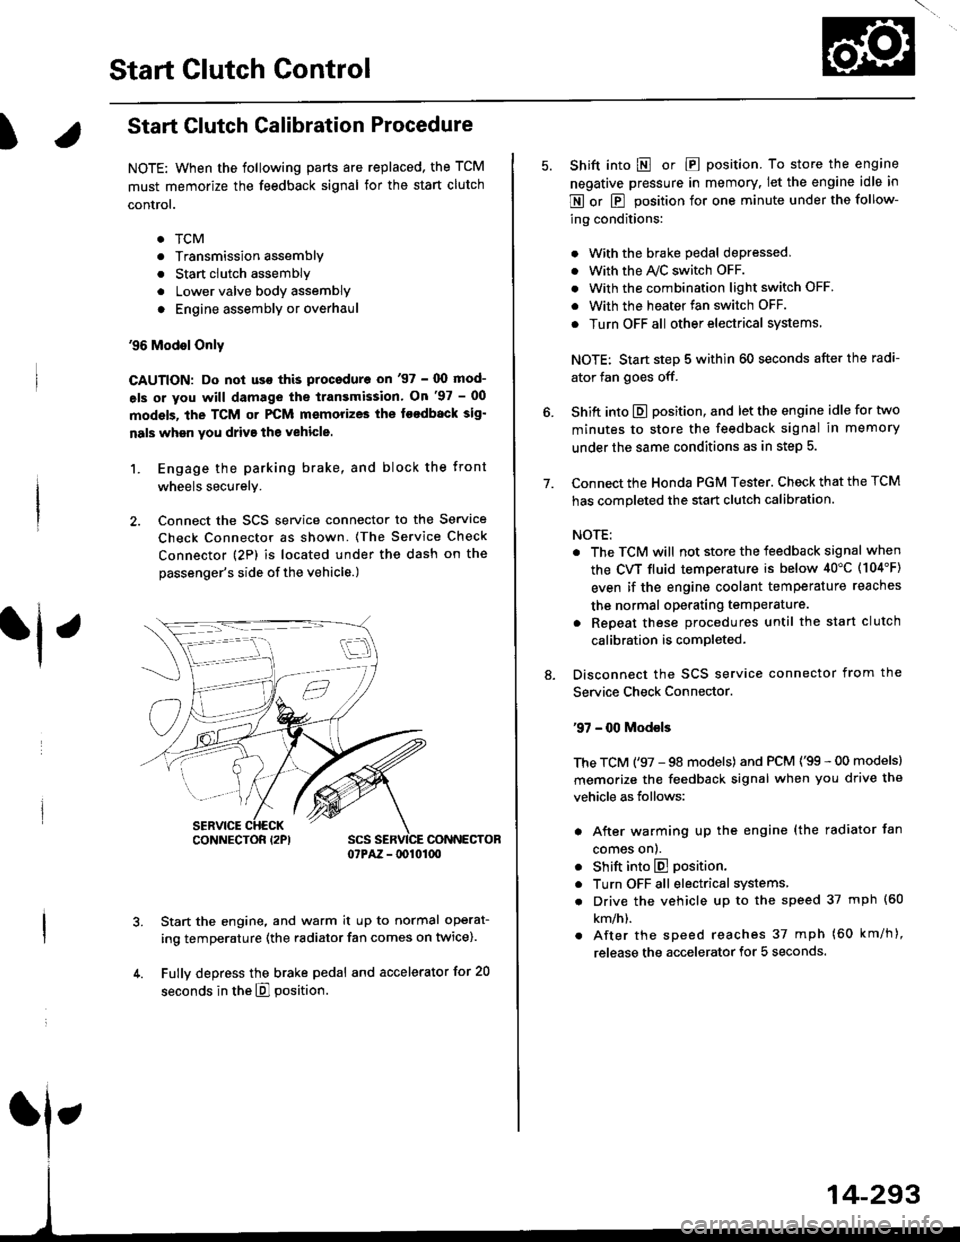 HONDA CIVIC 1996 6.G Workshop Manual Start Clutch Control@
T
Start Clutch Calibration Procedure
NOTE: When the following parts are replaced, the TCM
must memorize the feedback signal for the start clutch
control.
. TCM
. Transmissionasse